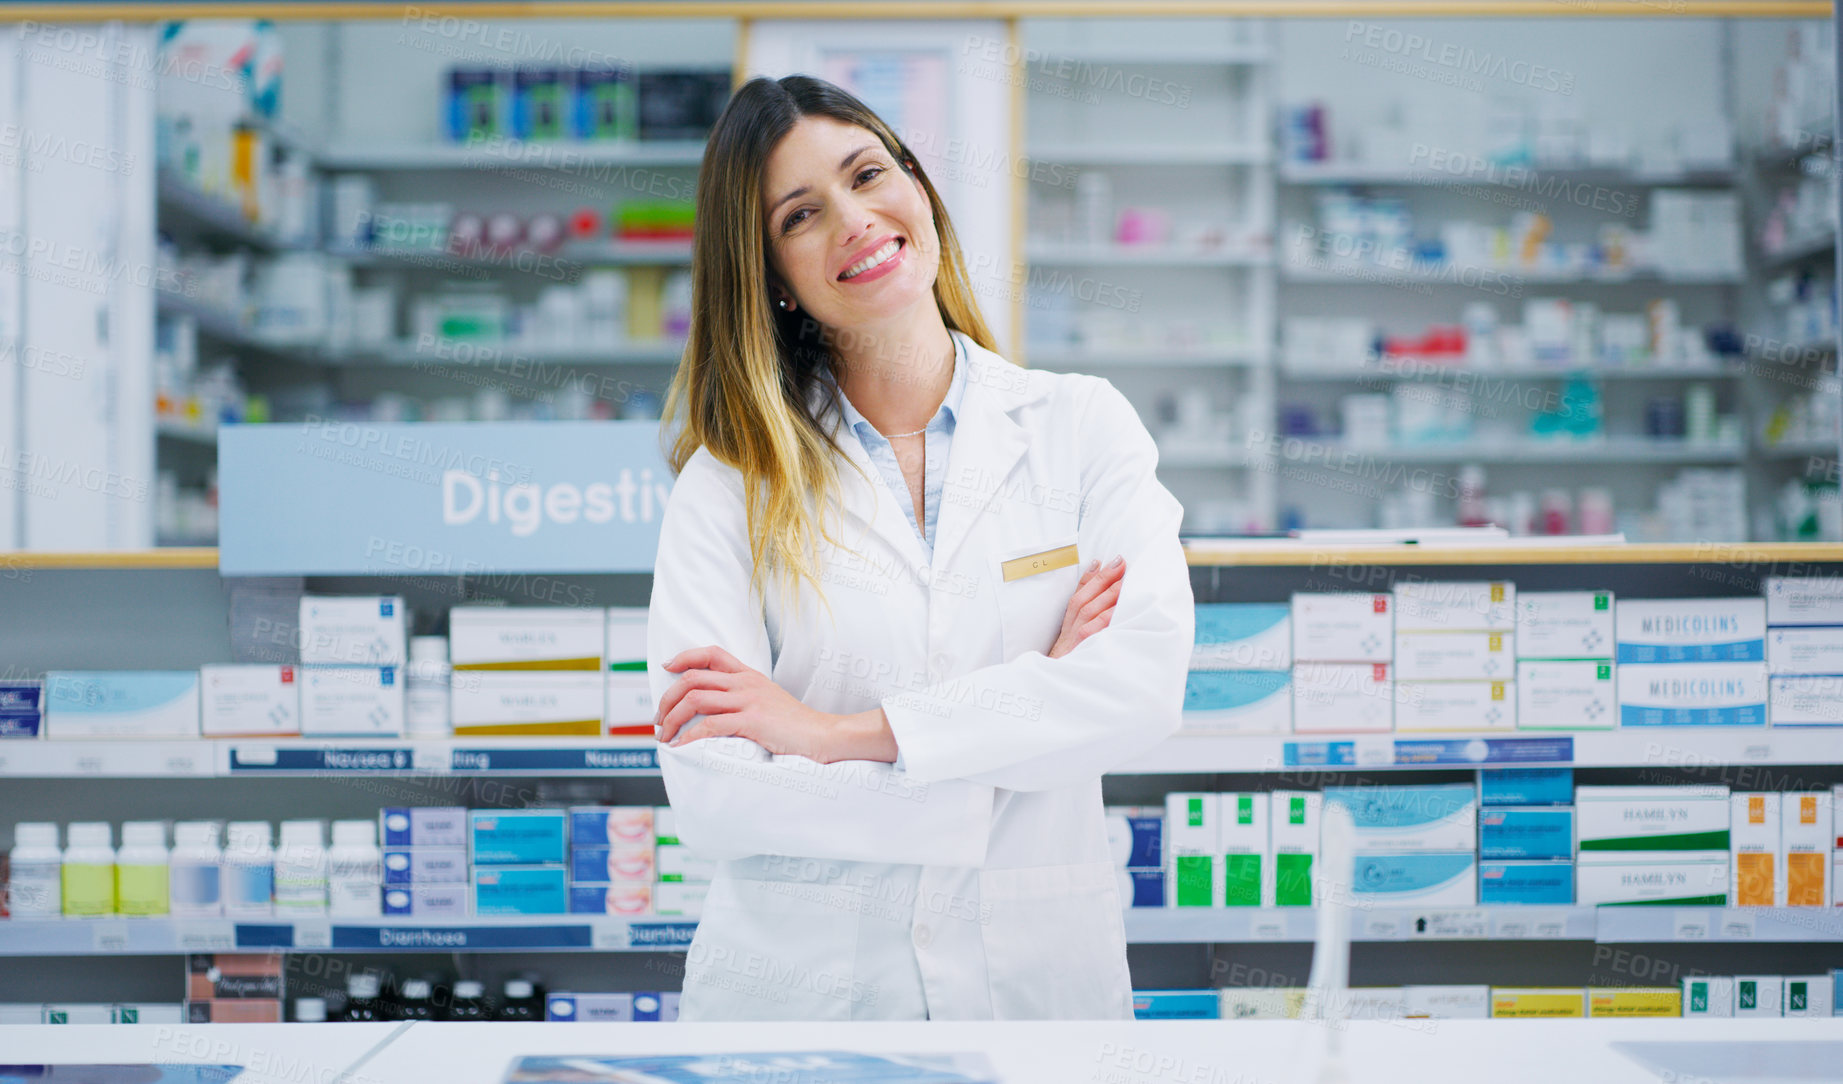 Buy stock photo Pharmacy portrait, arms crossed and happy woman, pharmacist or manager in drugs store, dispensary or shop. Hospital dispensary, medicine product shelf and person confident in retail clinic service